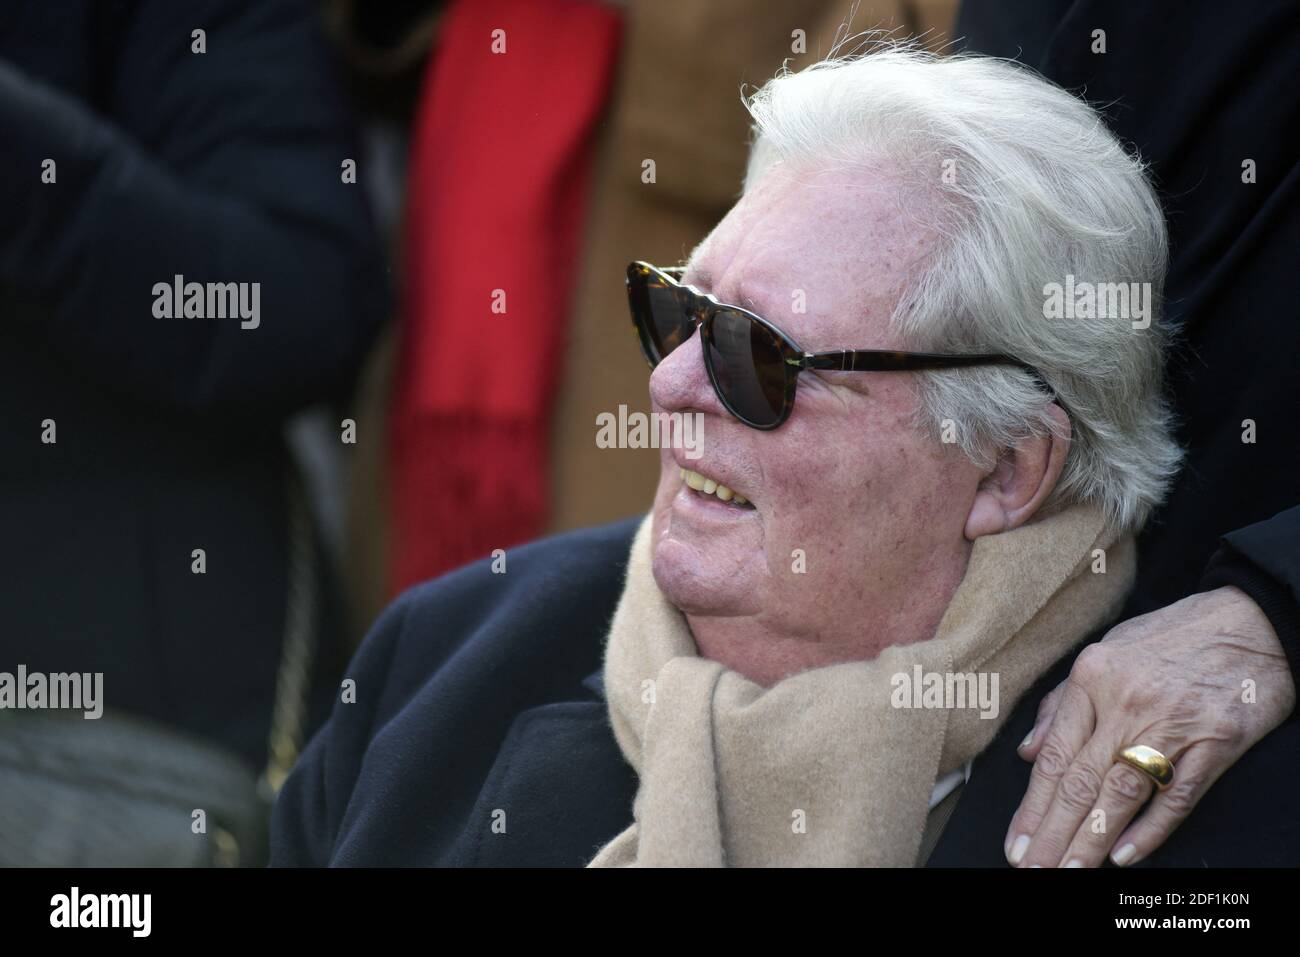 French cartoonist and illustrator Jean-Jacques Sempe at a ceremony for the unveiling of a commemorative statue of French cartoonist Rene Goscinny by French sculptor Sebastien Langloys in Paris, France on January 23, 2020. Photo by Patrice Pierrot/Avenir Pictures/ABACAPRESS.COM Stock Photo